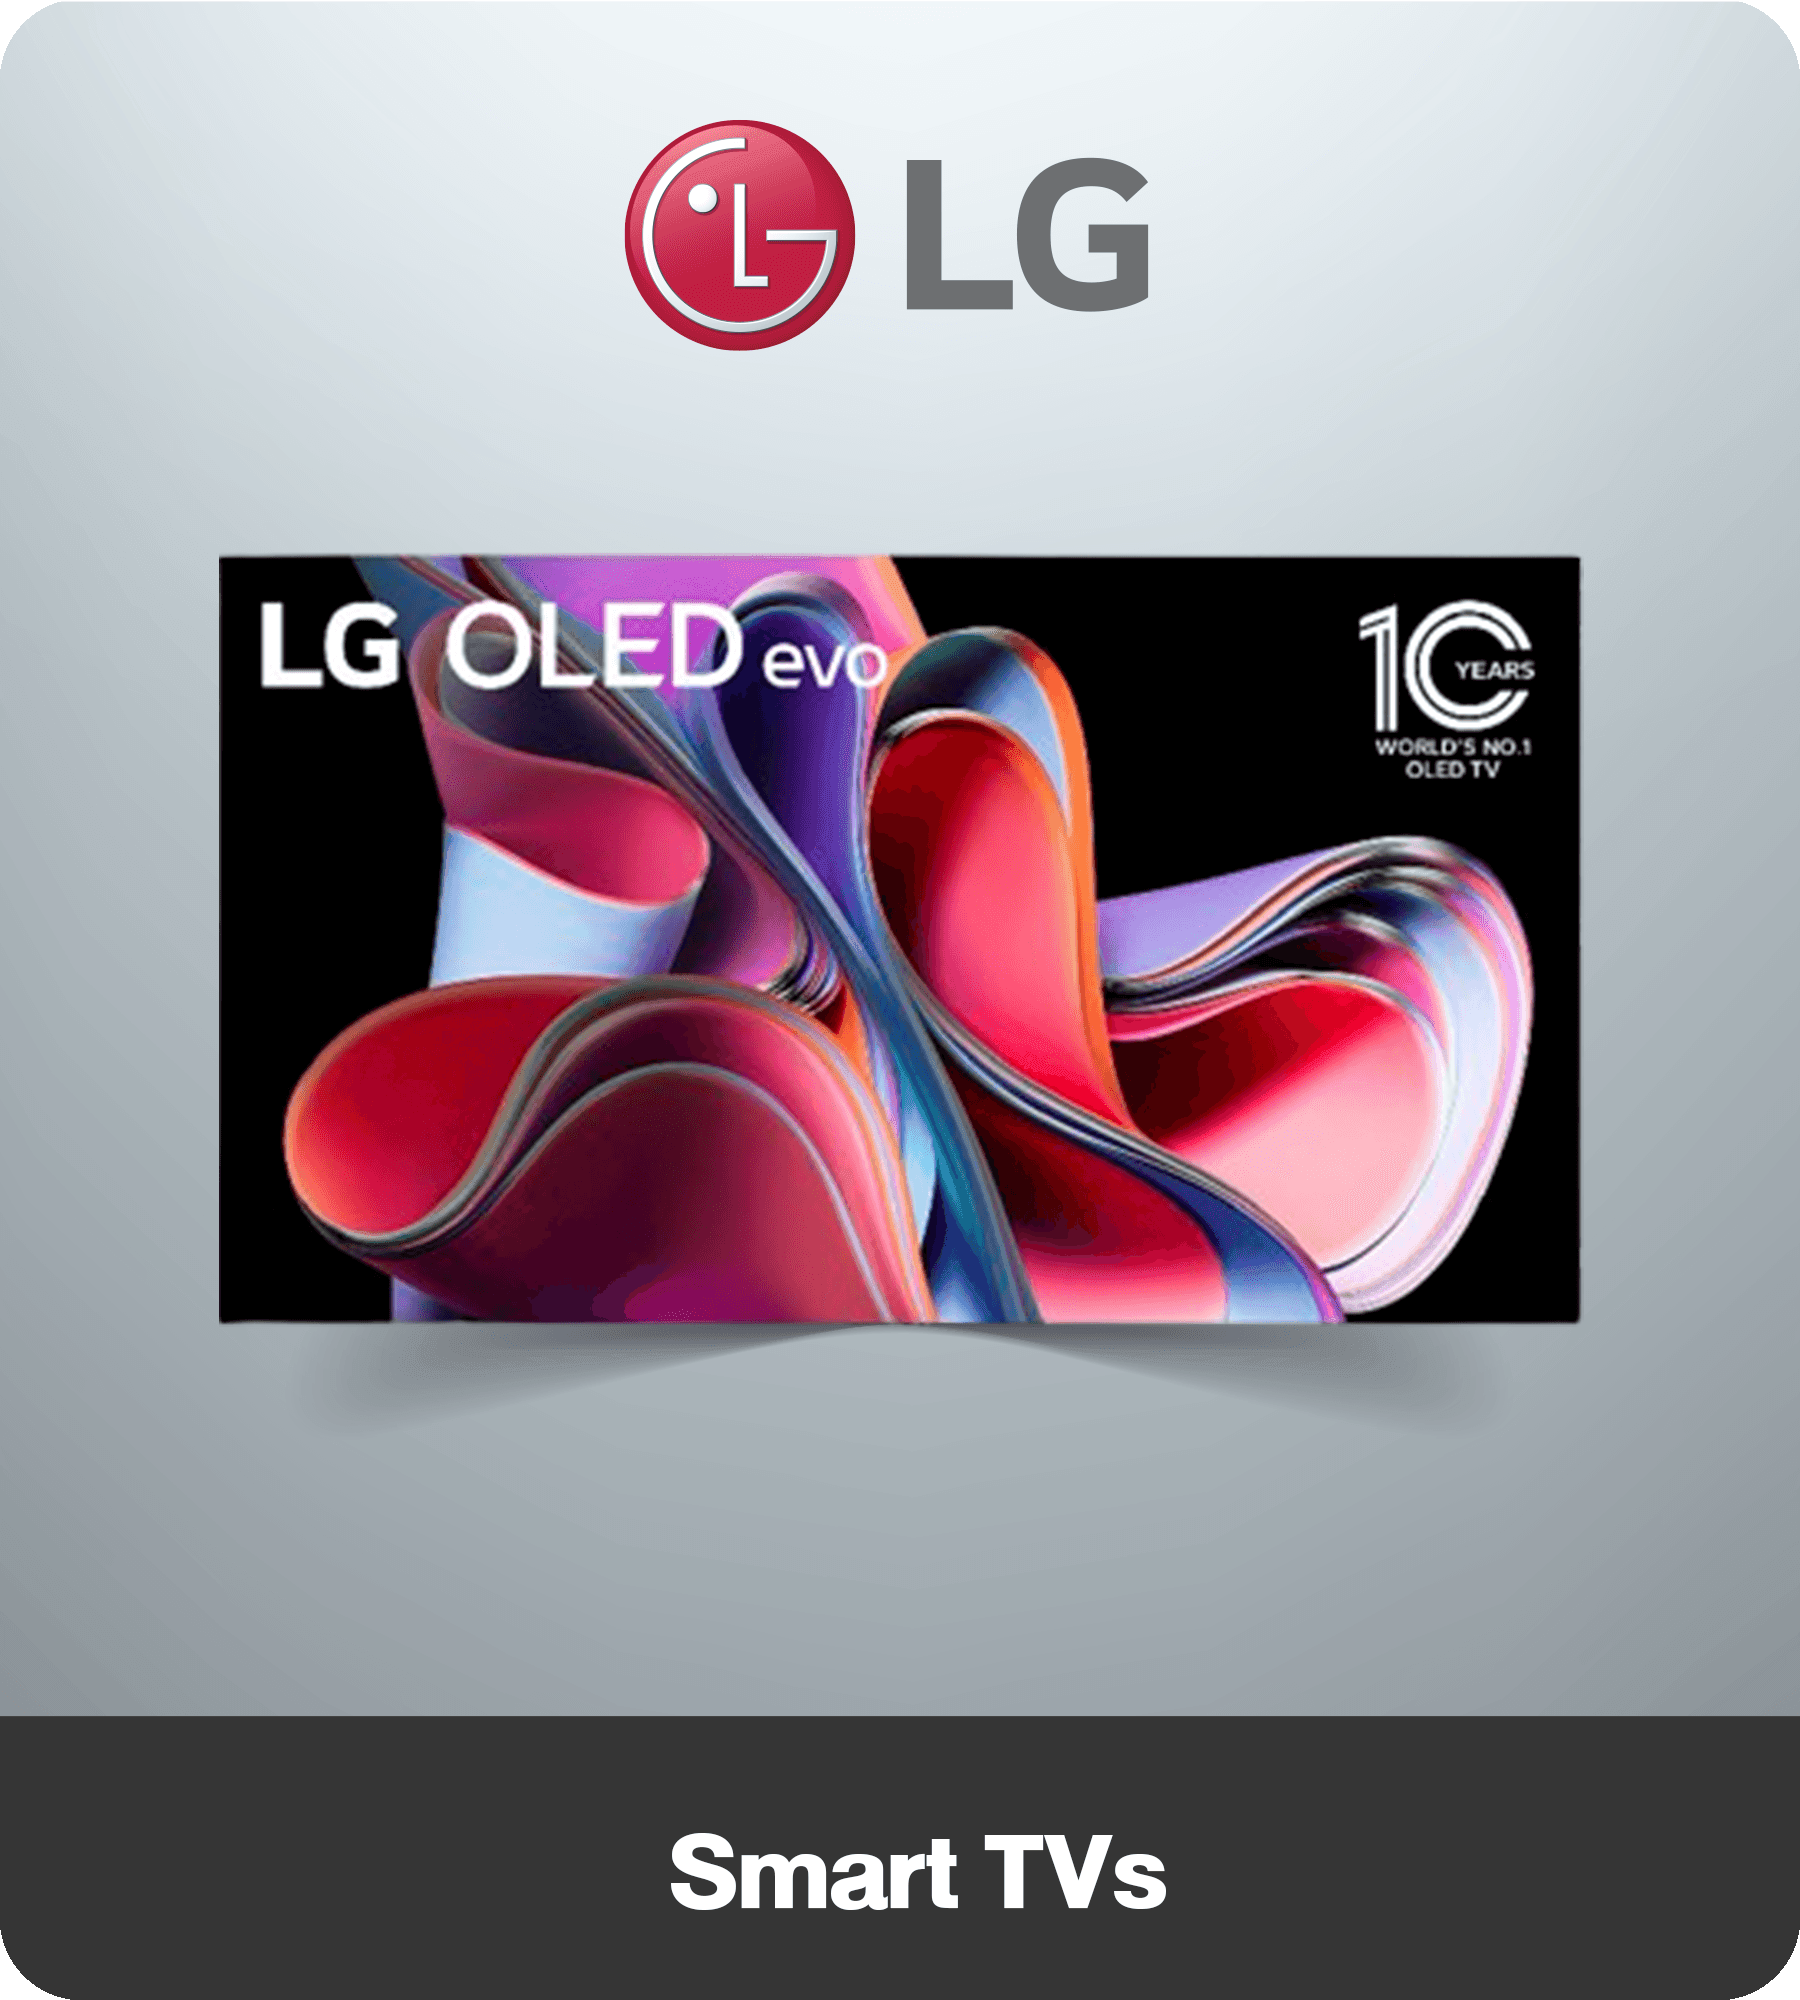 Discover Exclusive LG Items